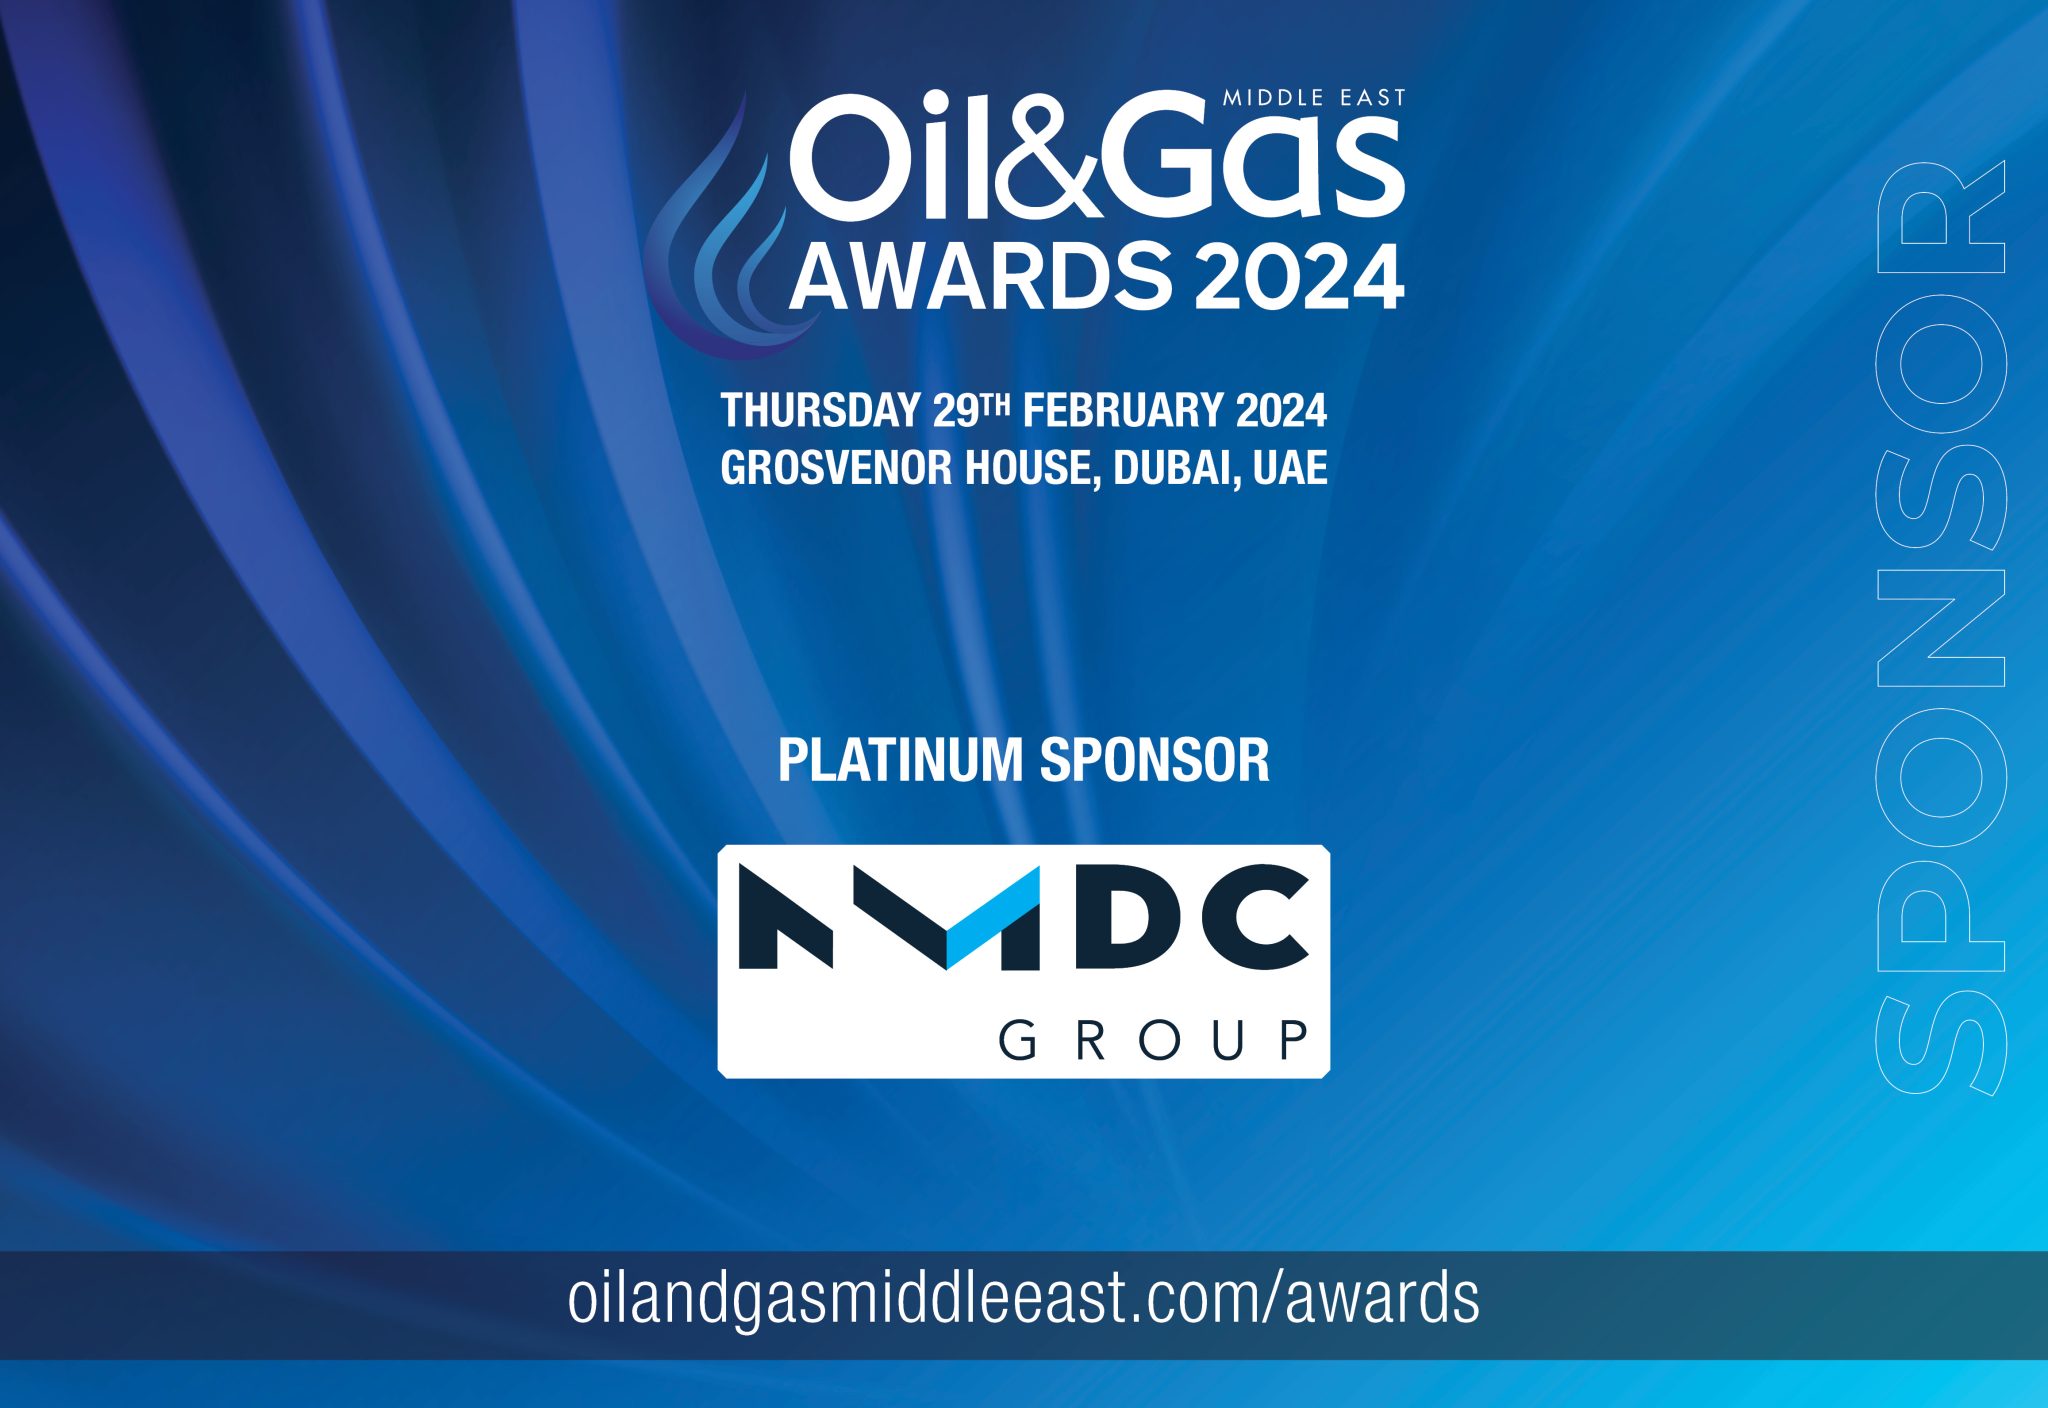 Oil & Gas Middle East Awards 2024 Meet our Platinum Sponsor NMDC Group